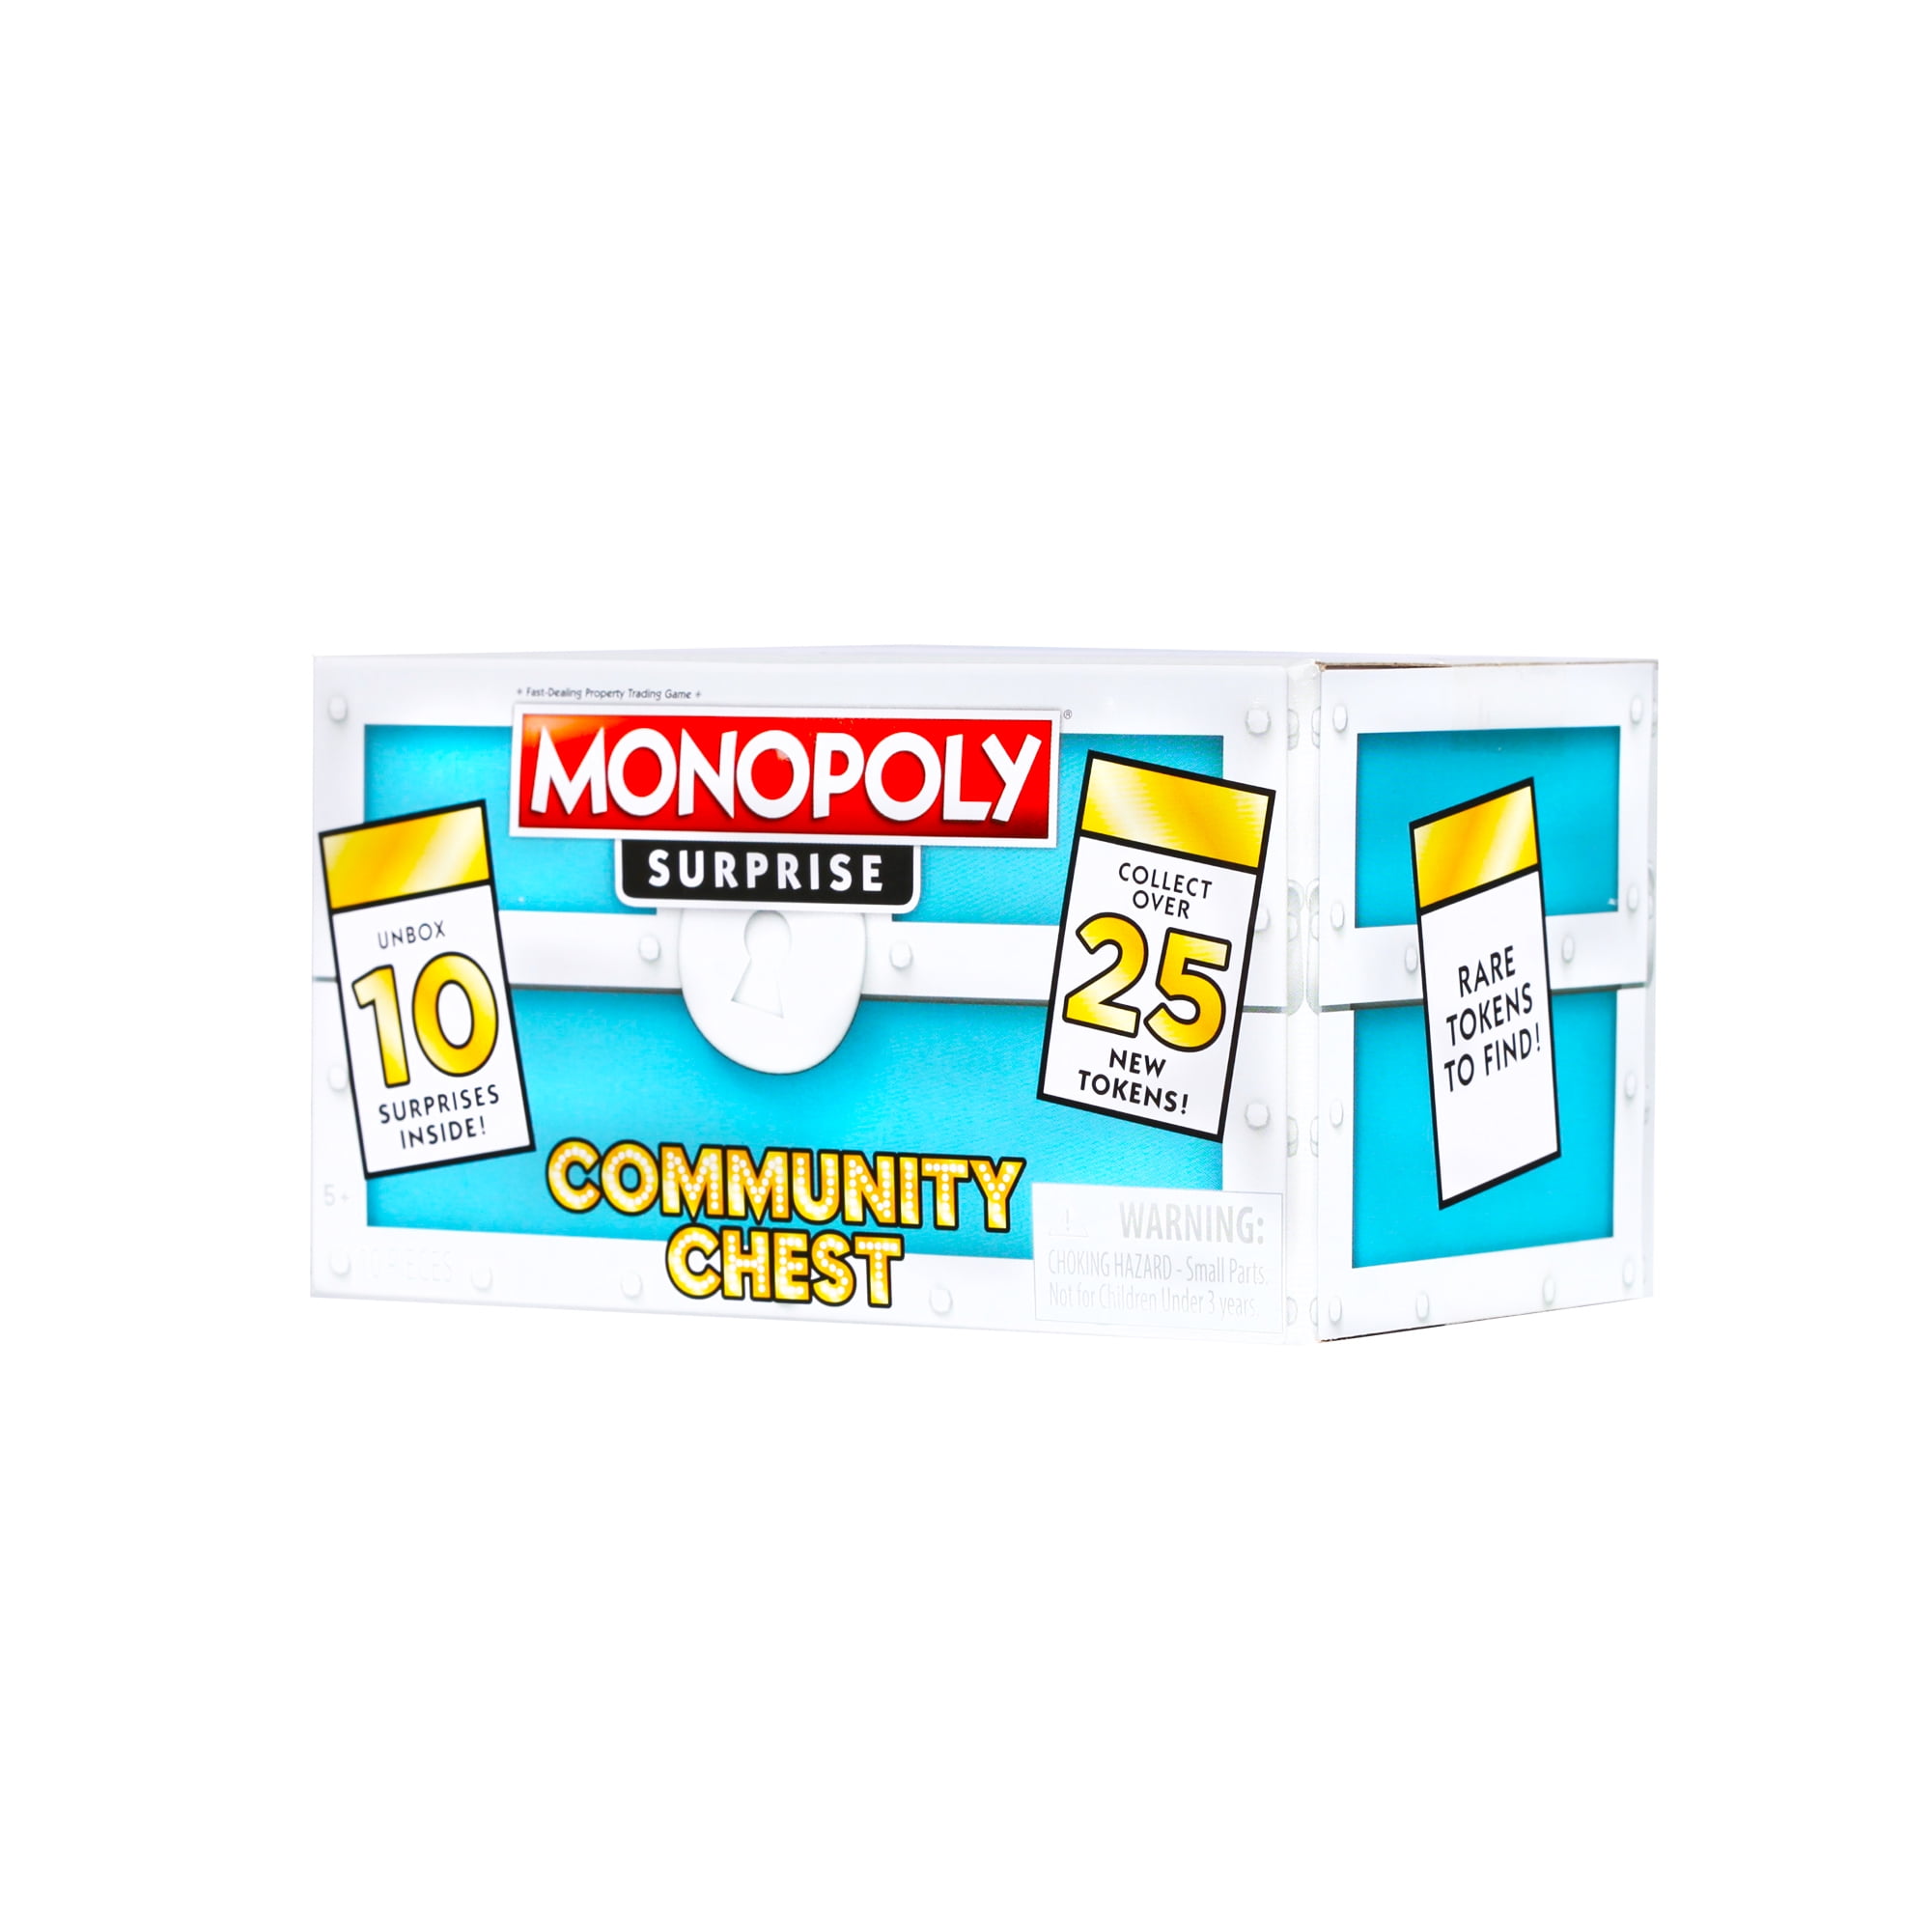 Blue Set Monopoly Surprise Community Chest Tokens Board Game X3 for sale online 